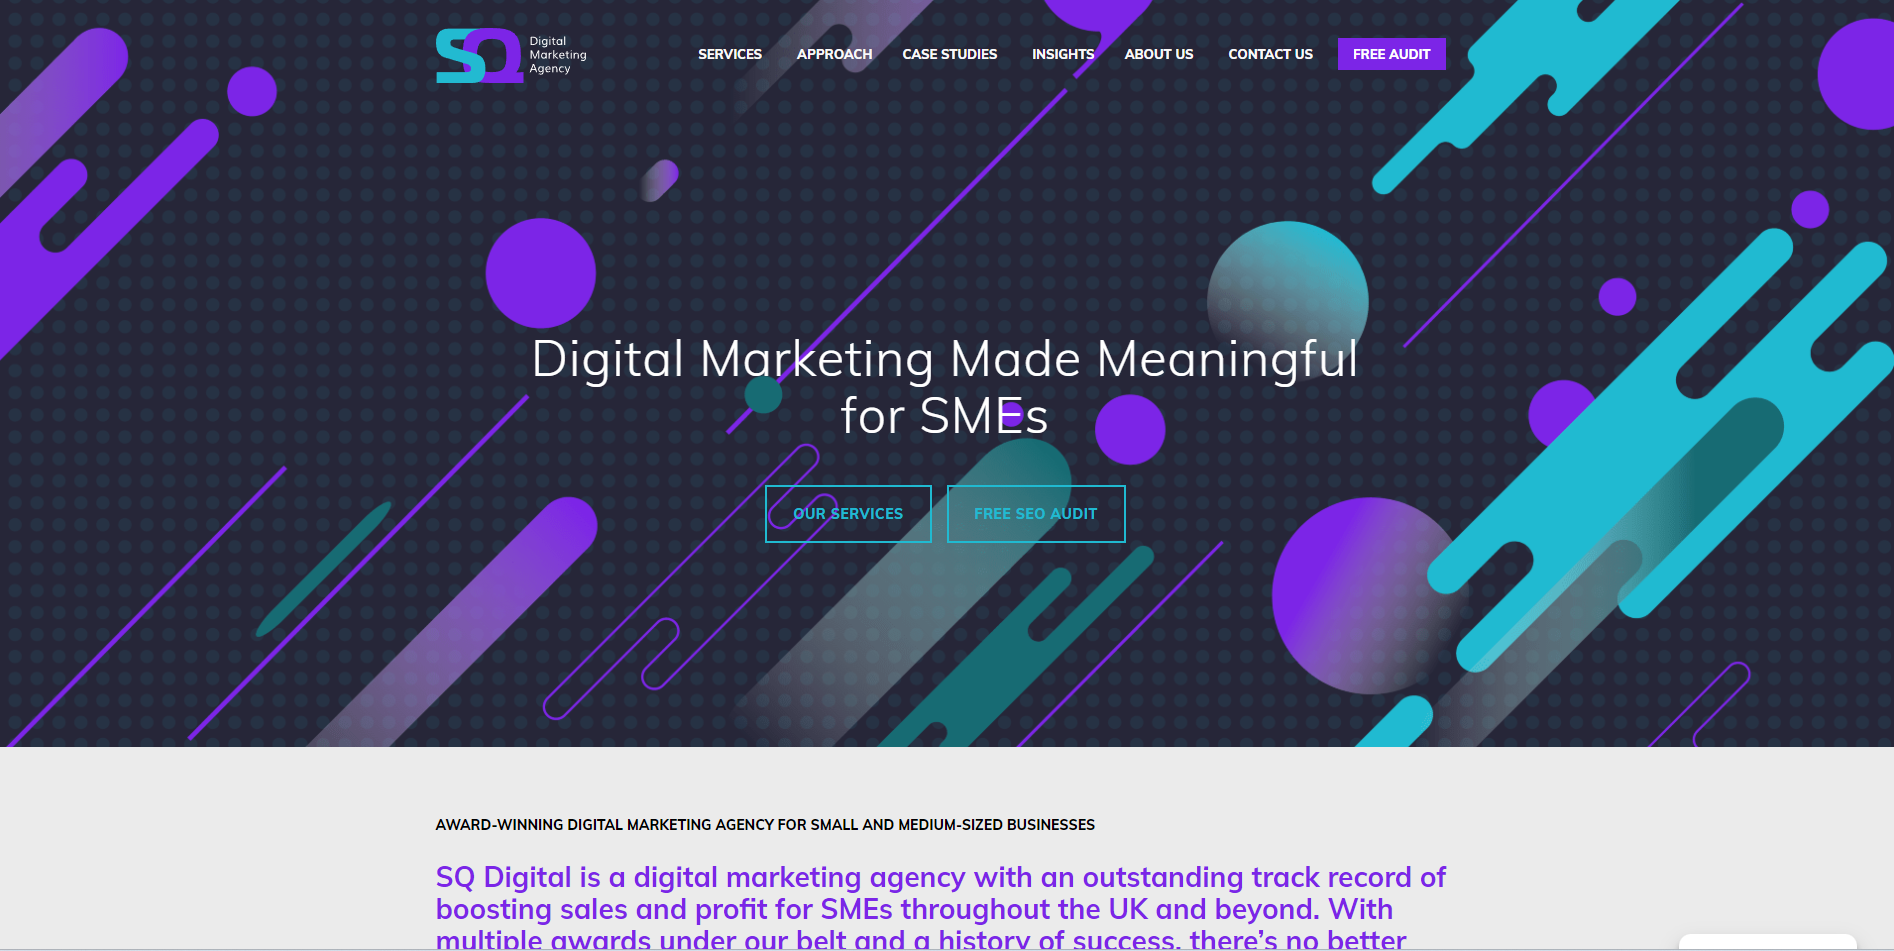 SQ Digital Marketing made meaningful for SMEs